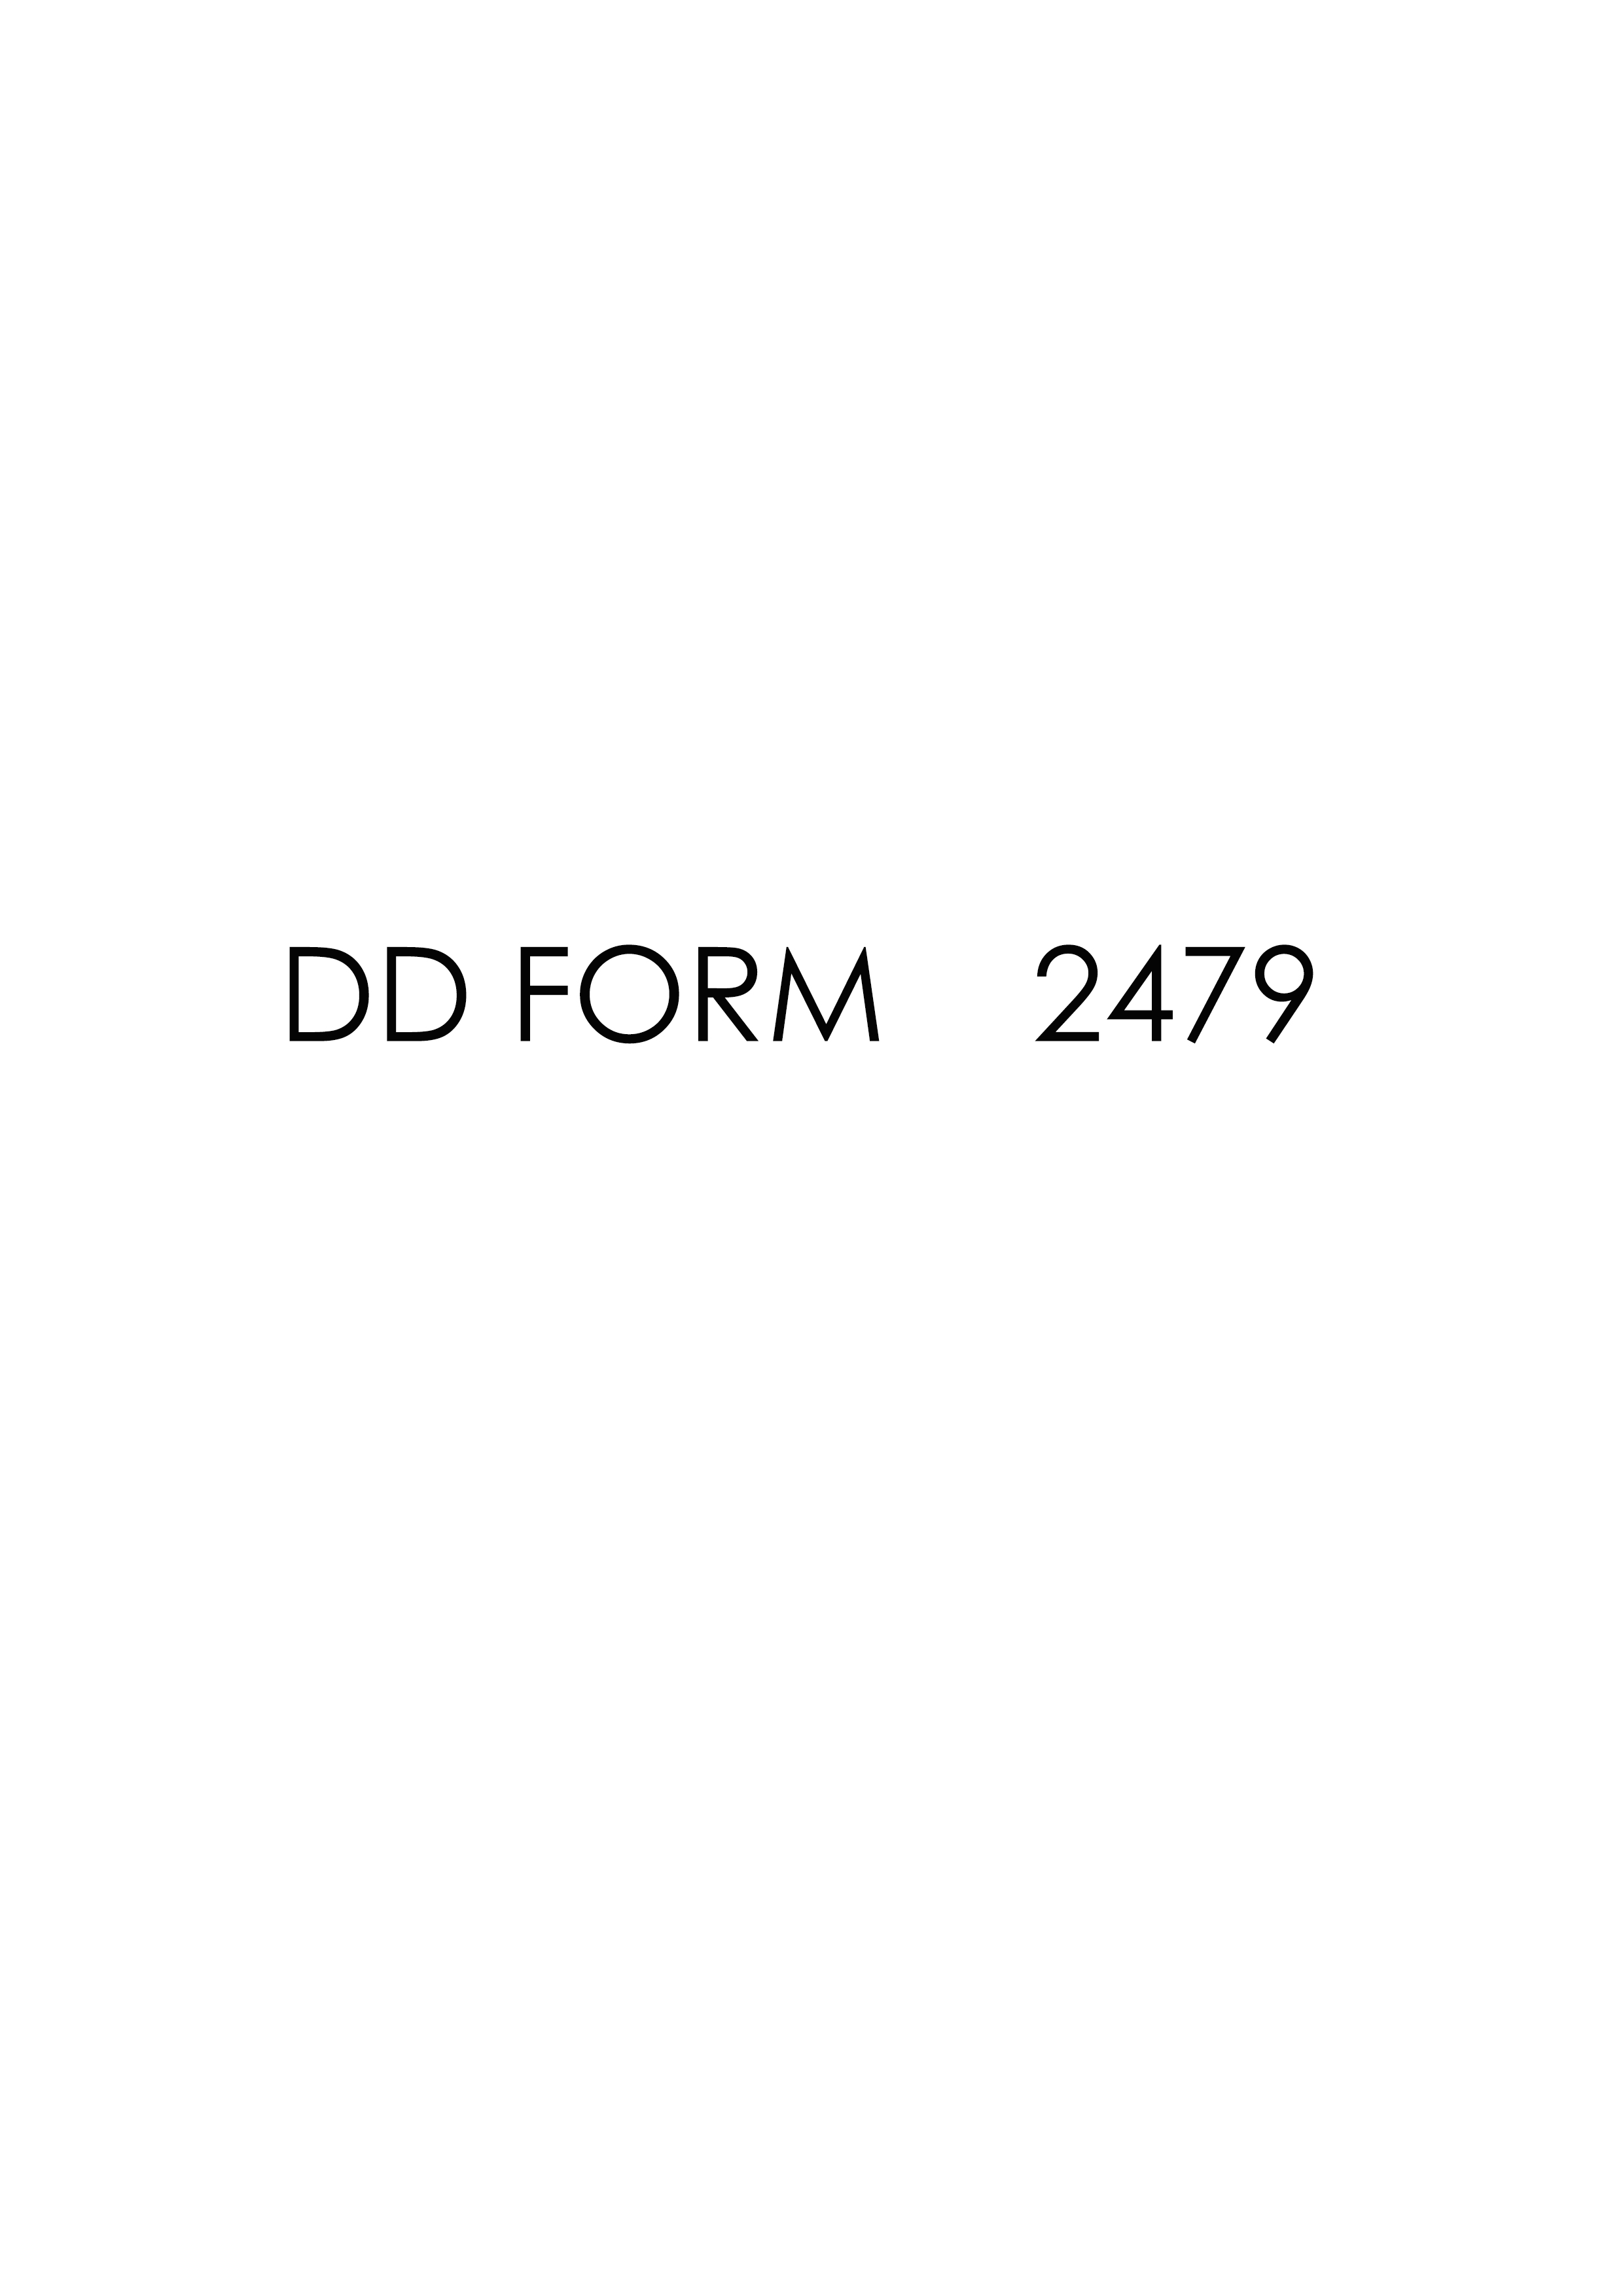 Download Fillable dd Form 2479